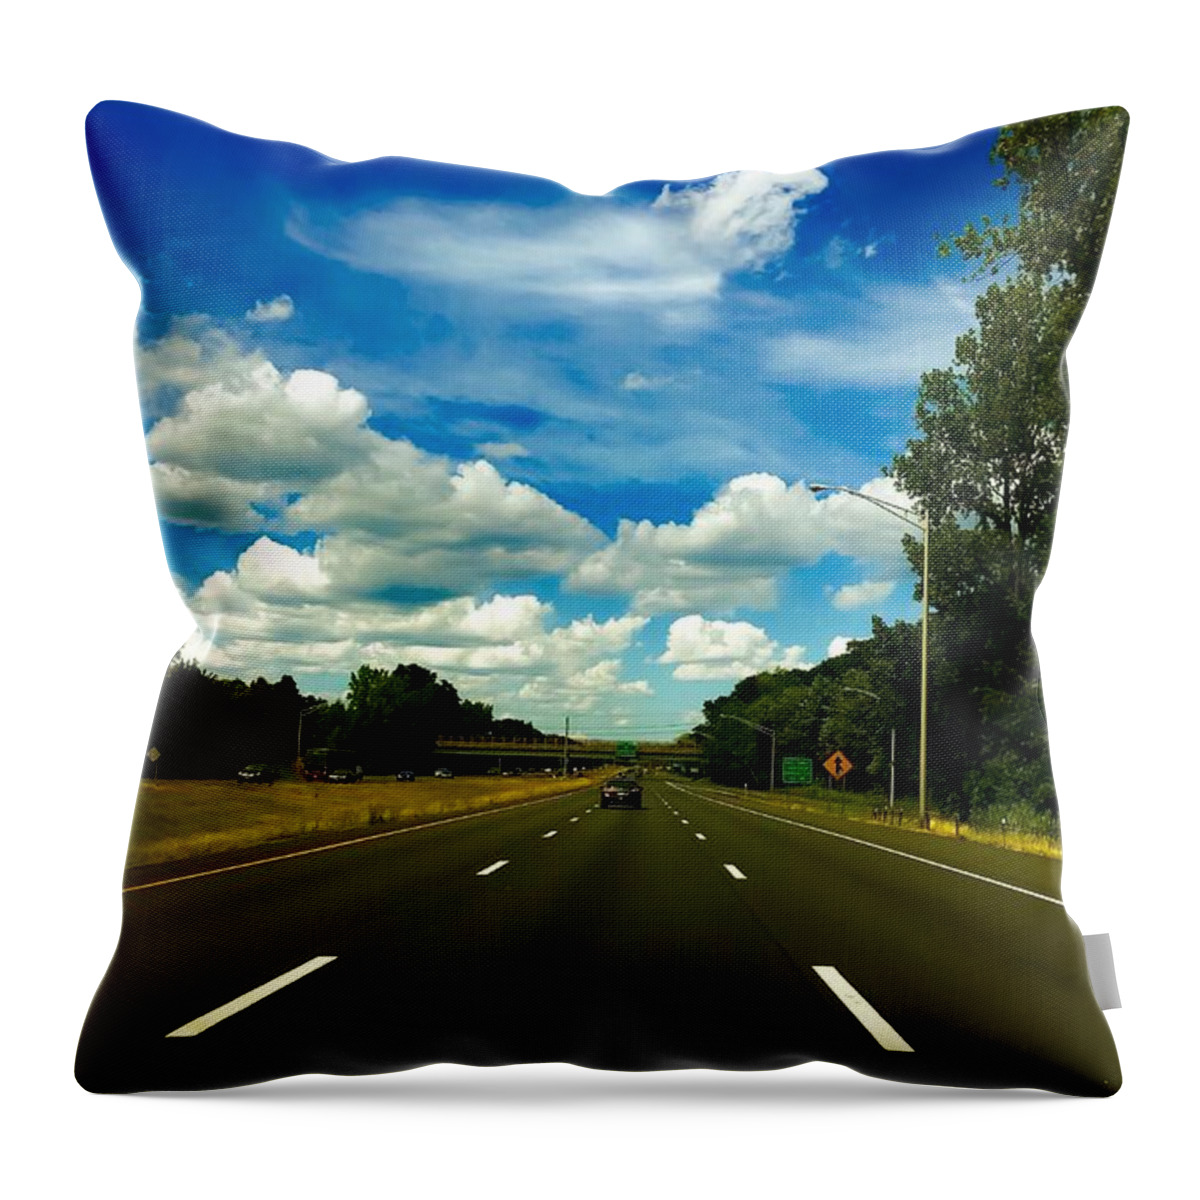 Photograph Throw Pillow featuring the photograph On The Road by MaryLee Parker